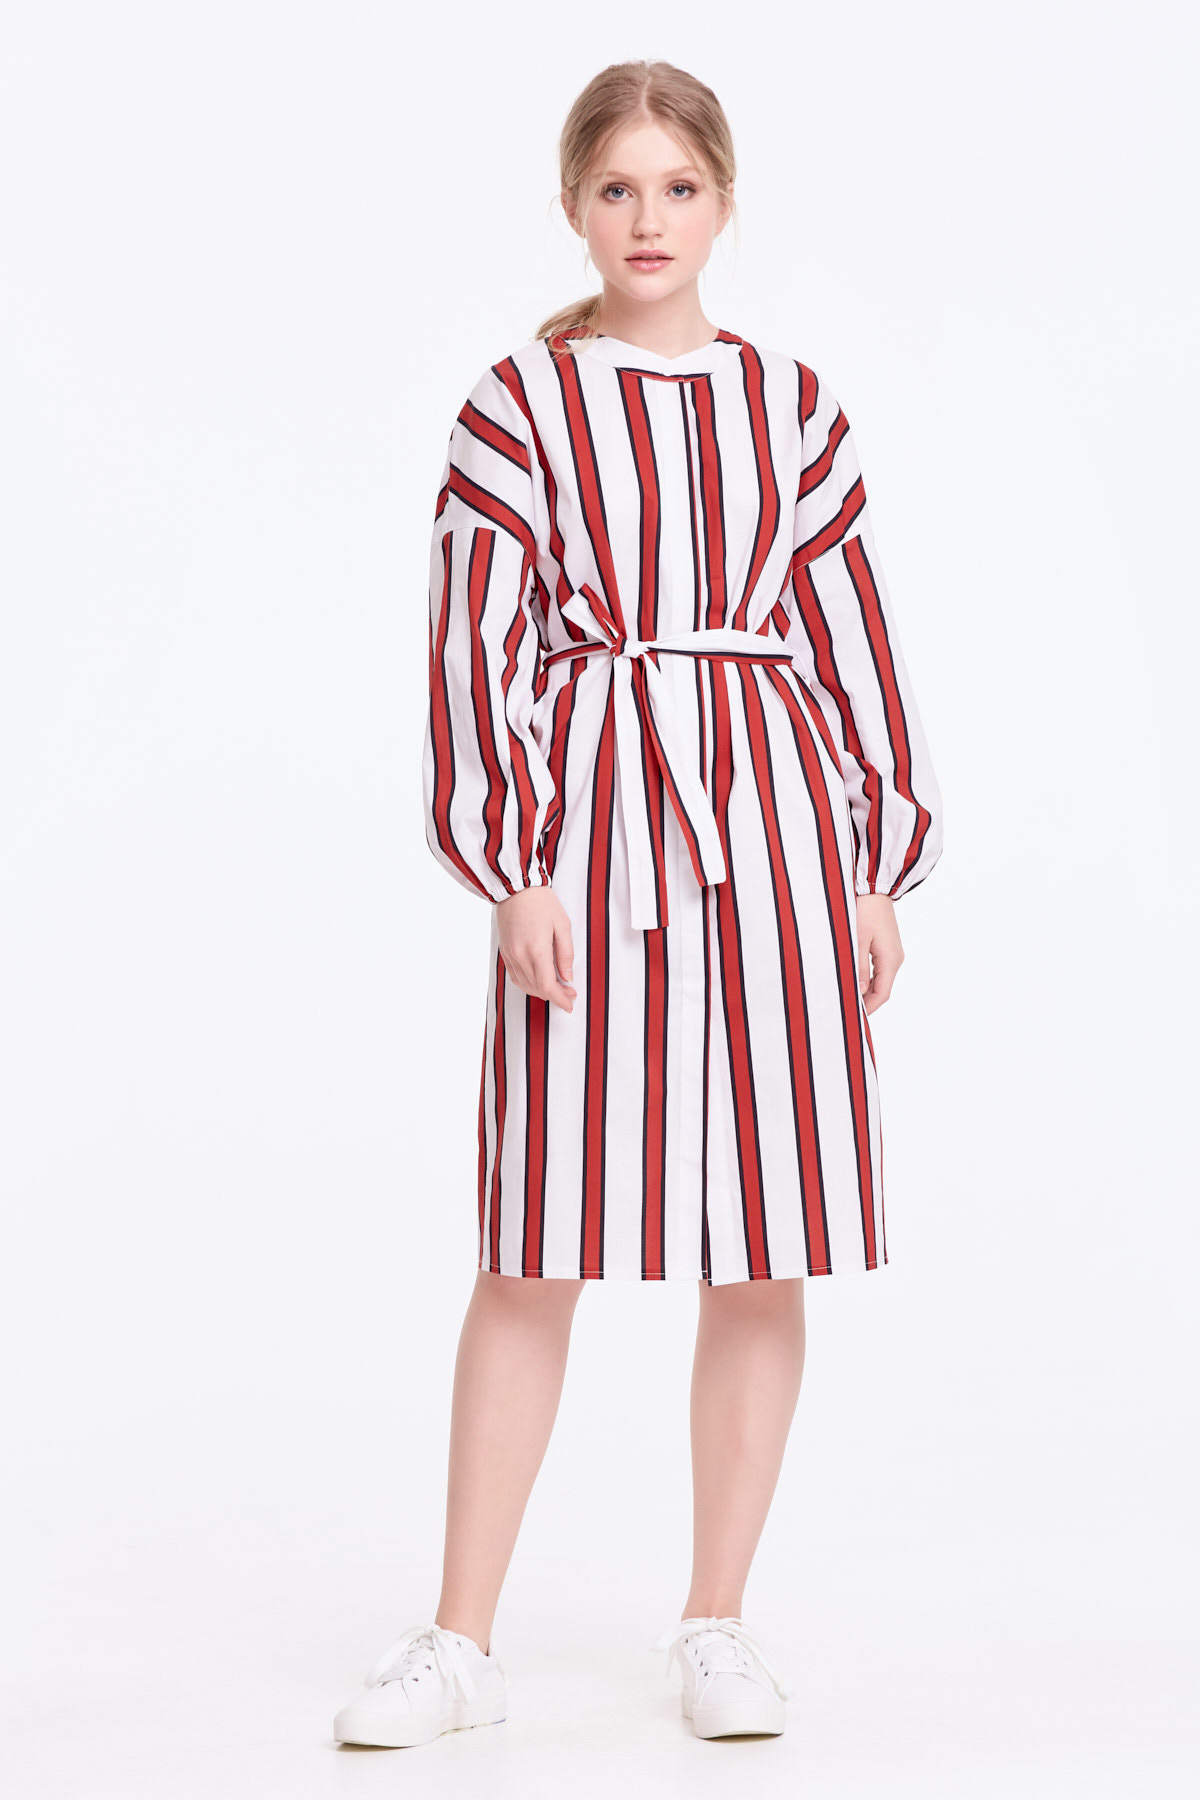 White dress with red and black stripes, photo 2